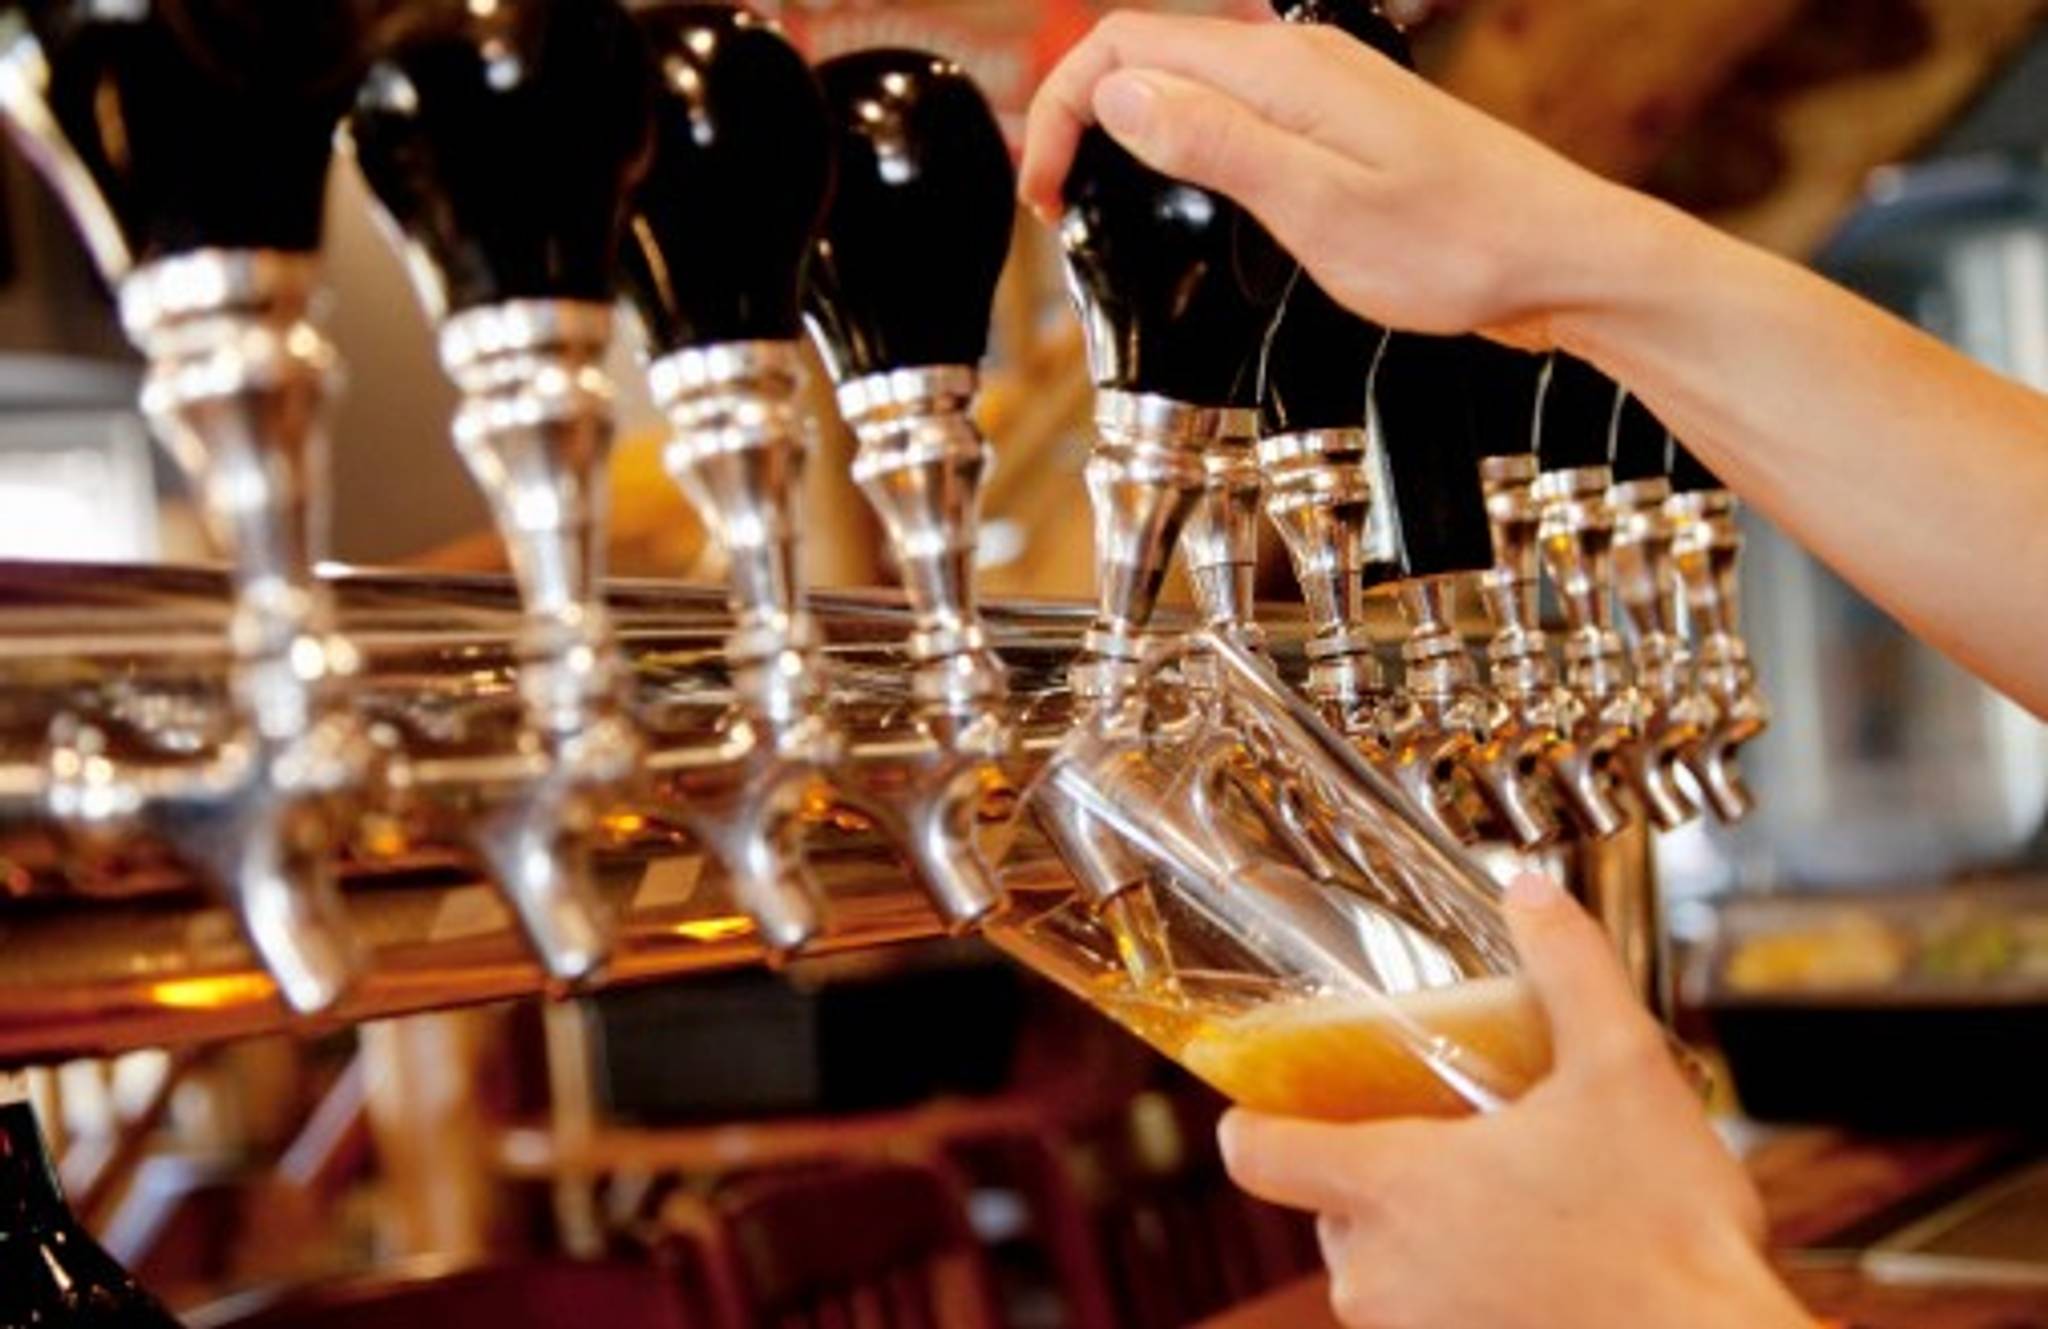 Mindful drinkers rejoice over draught no-ABV beer